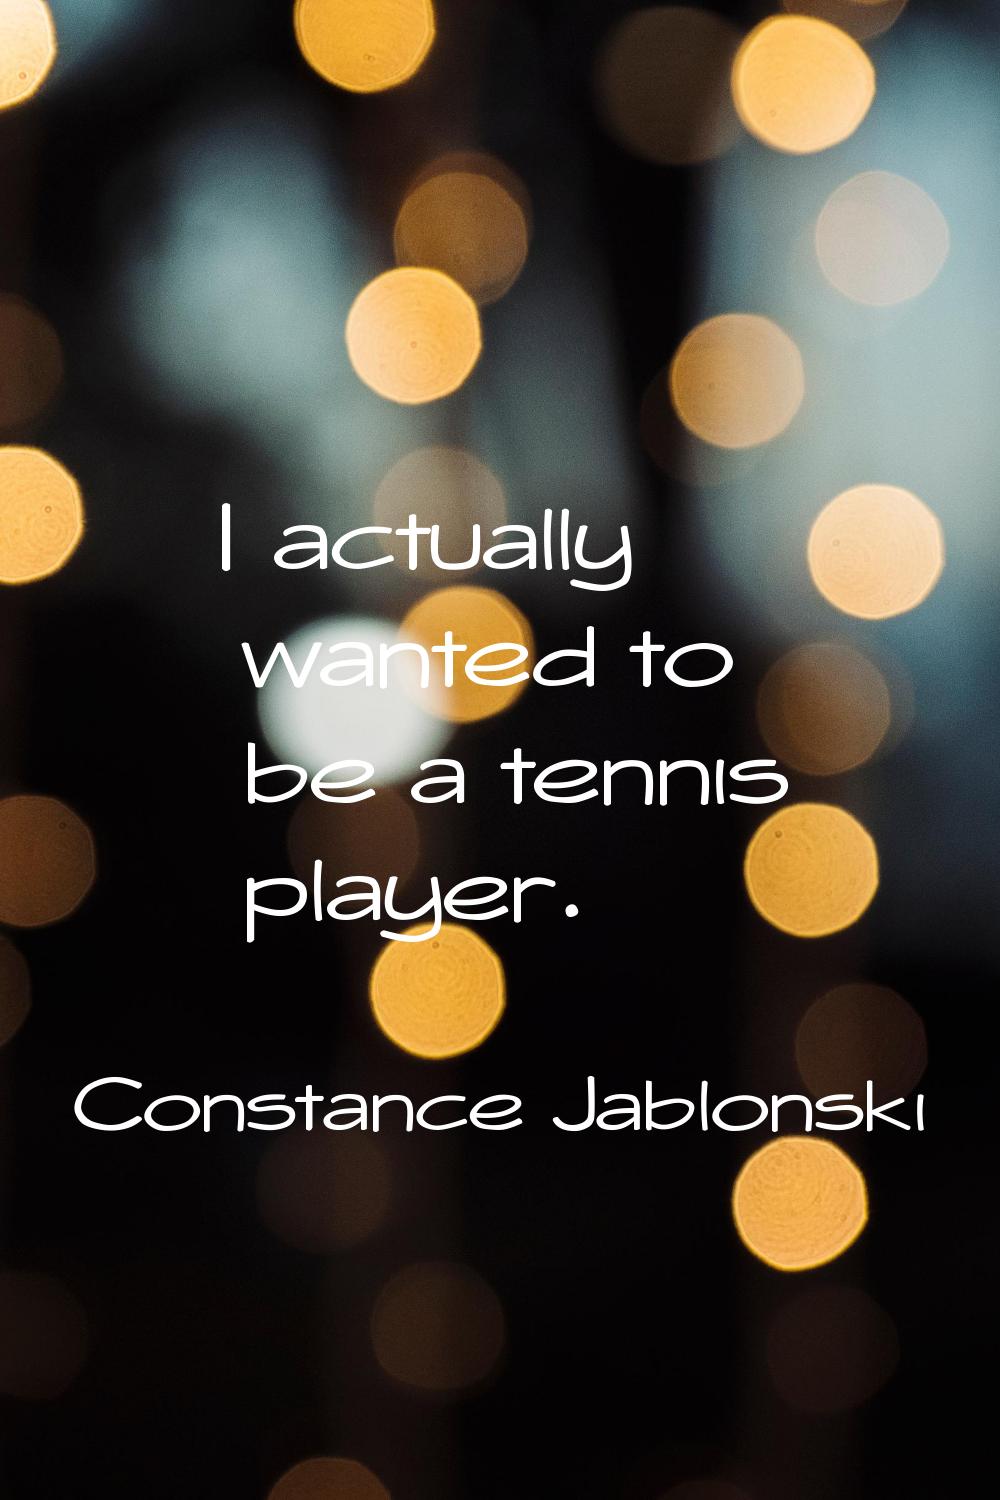 I actually wanted to be a tennis player.